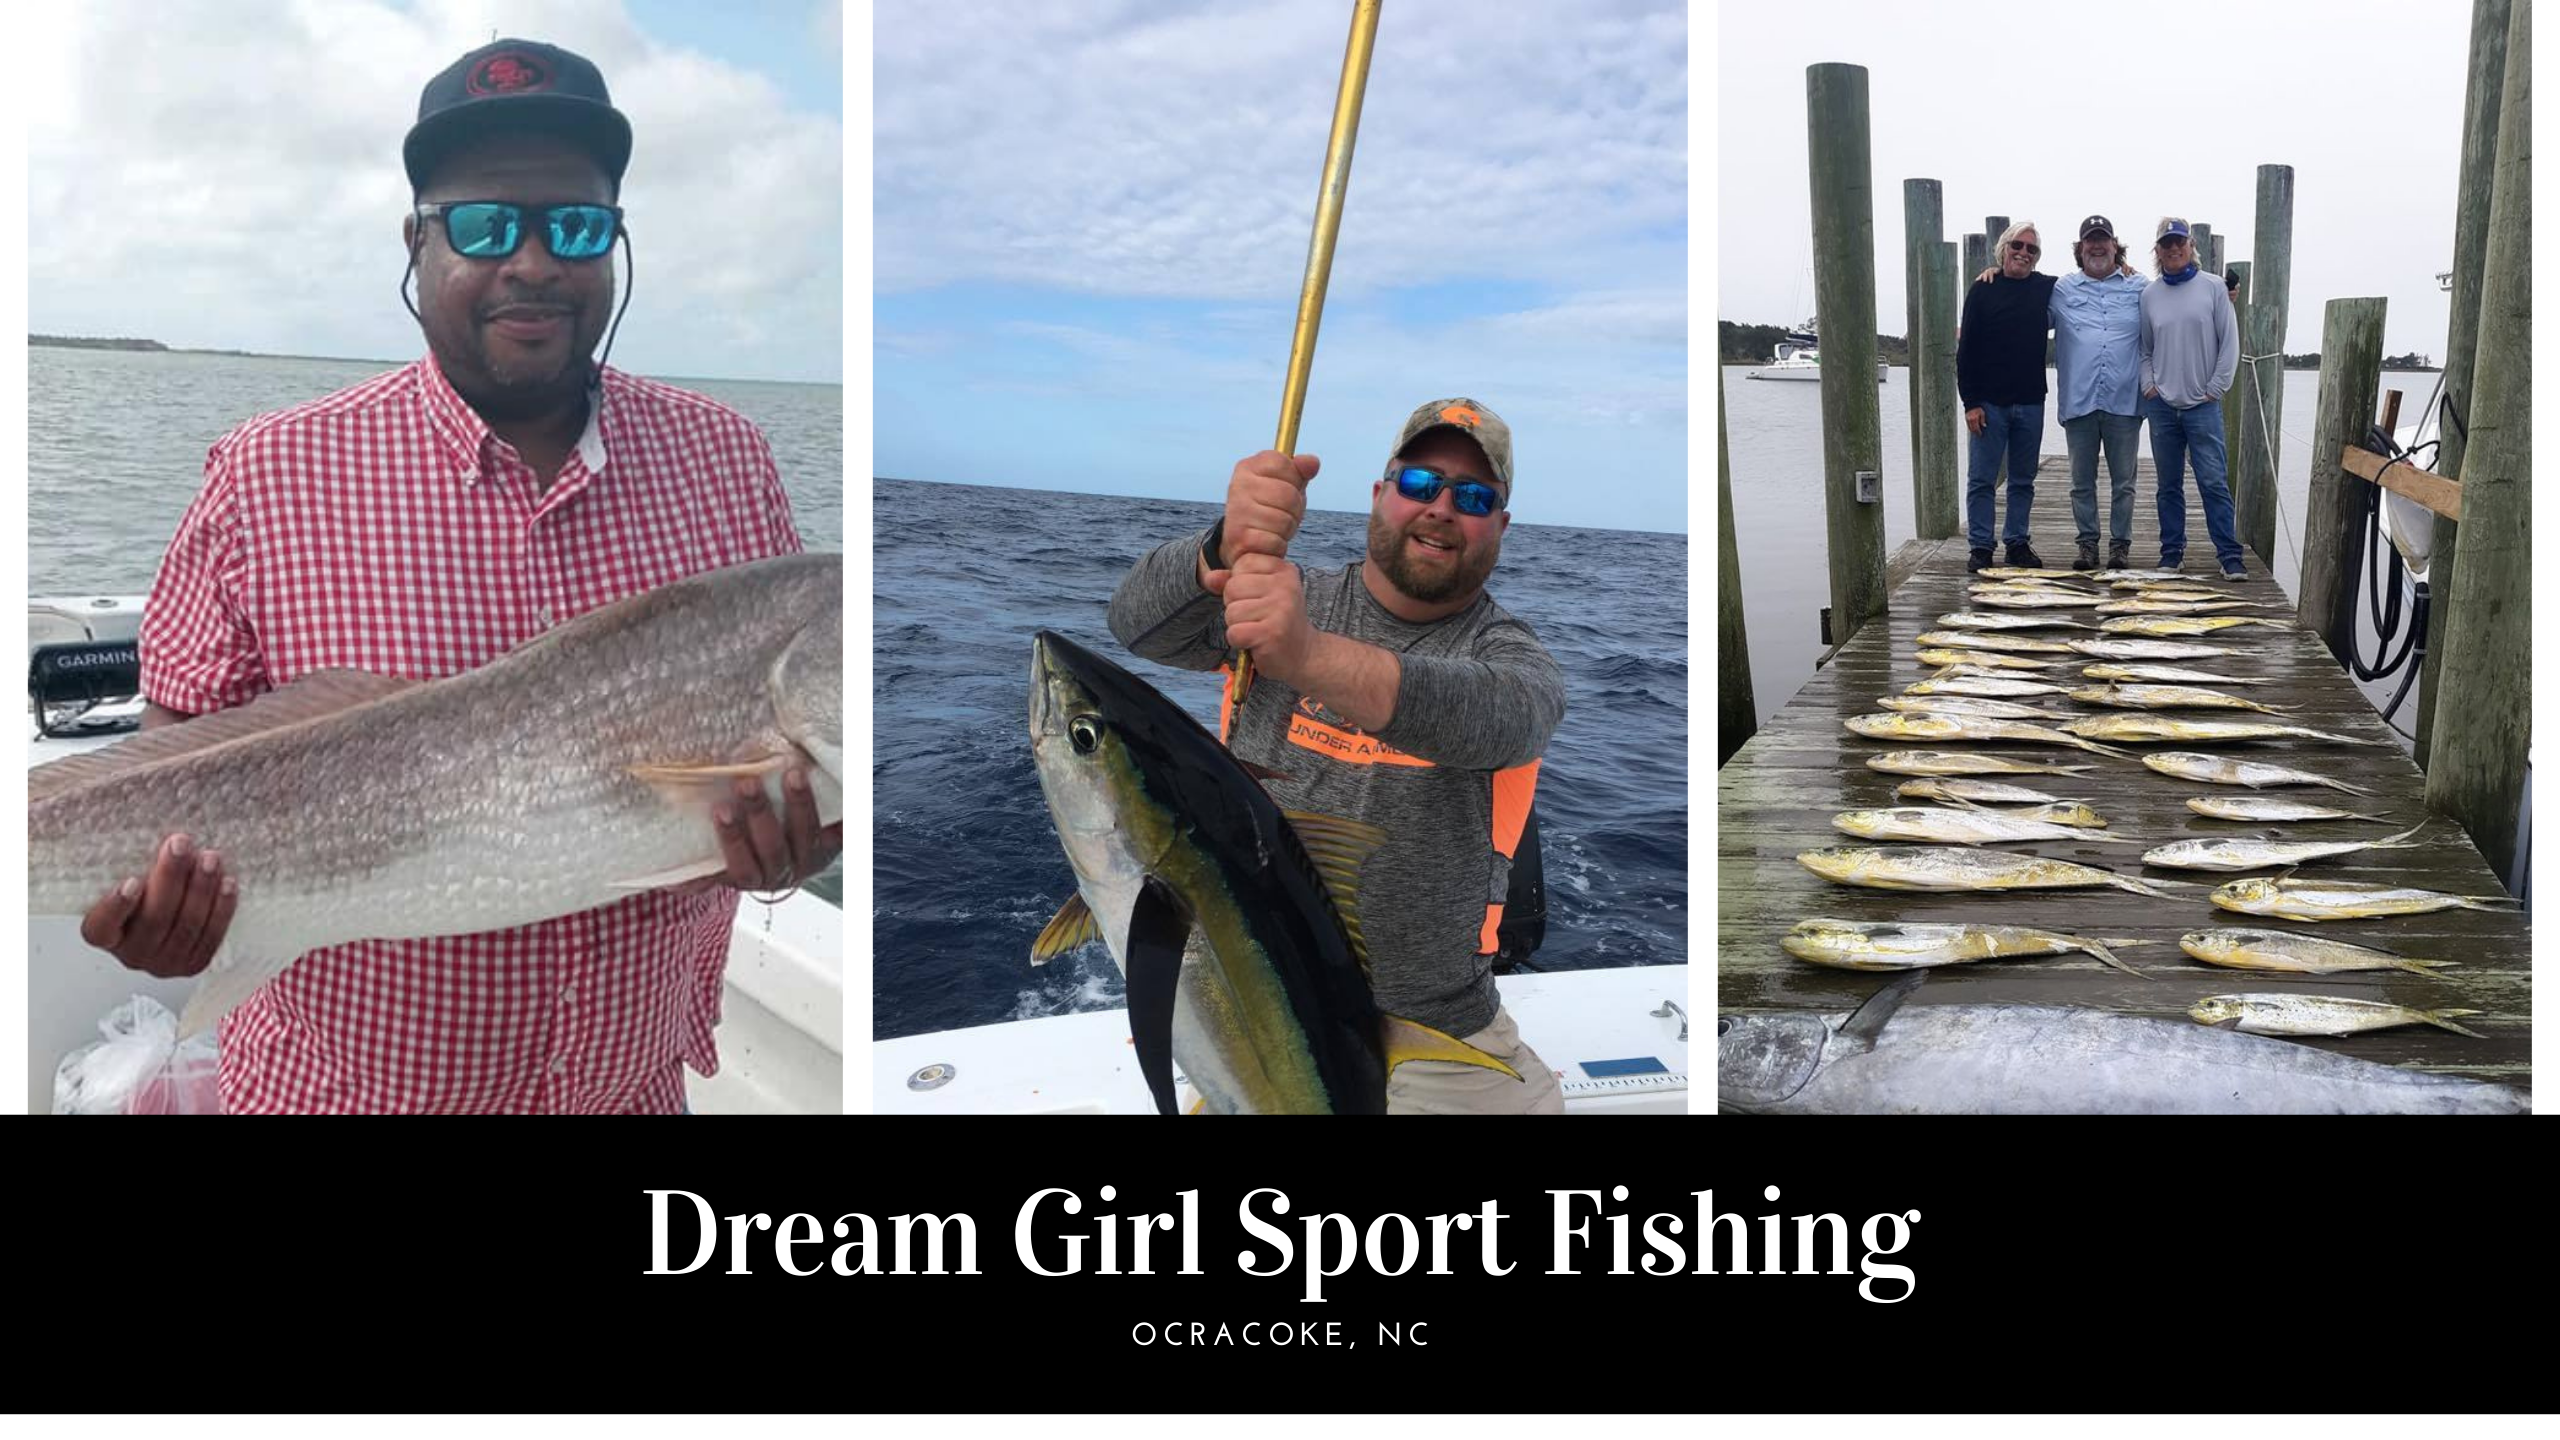 What's New with Dream Girl Sport Fishing